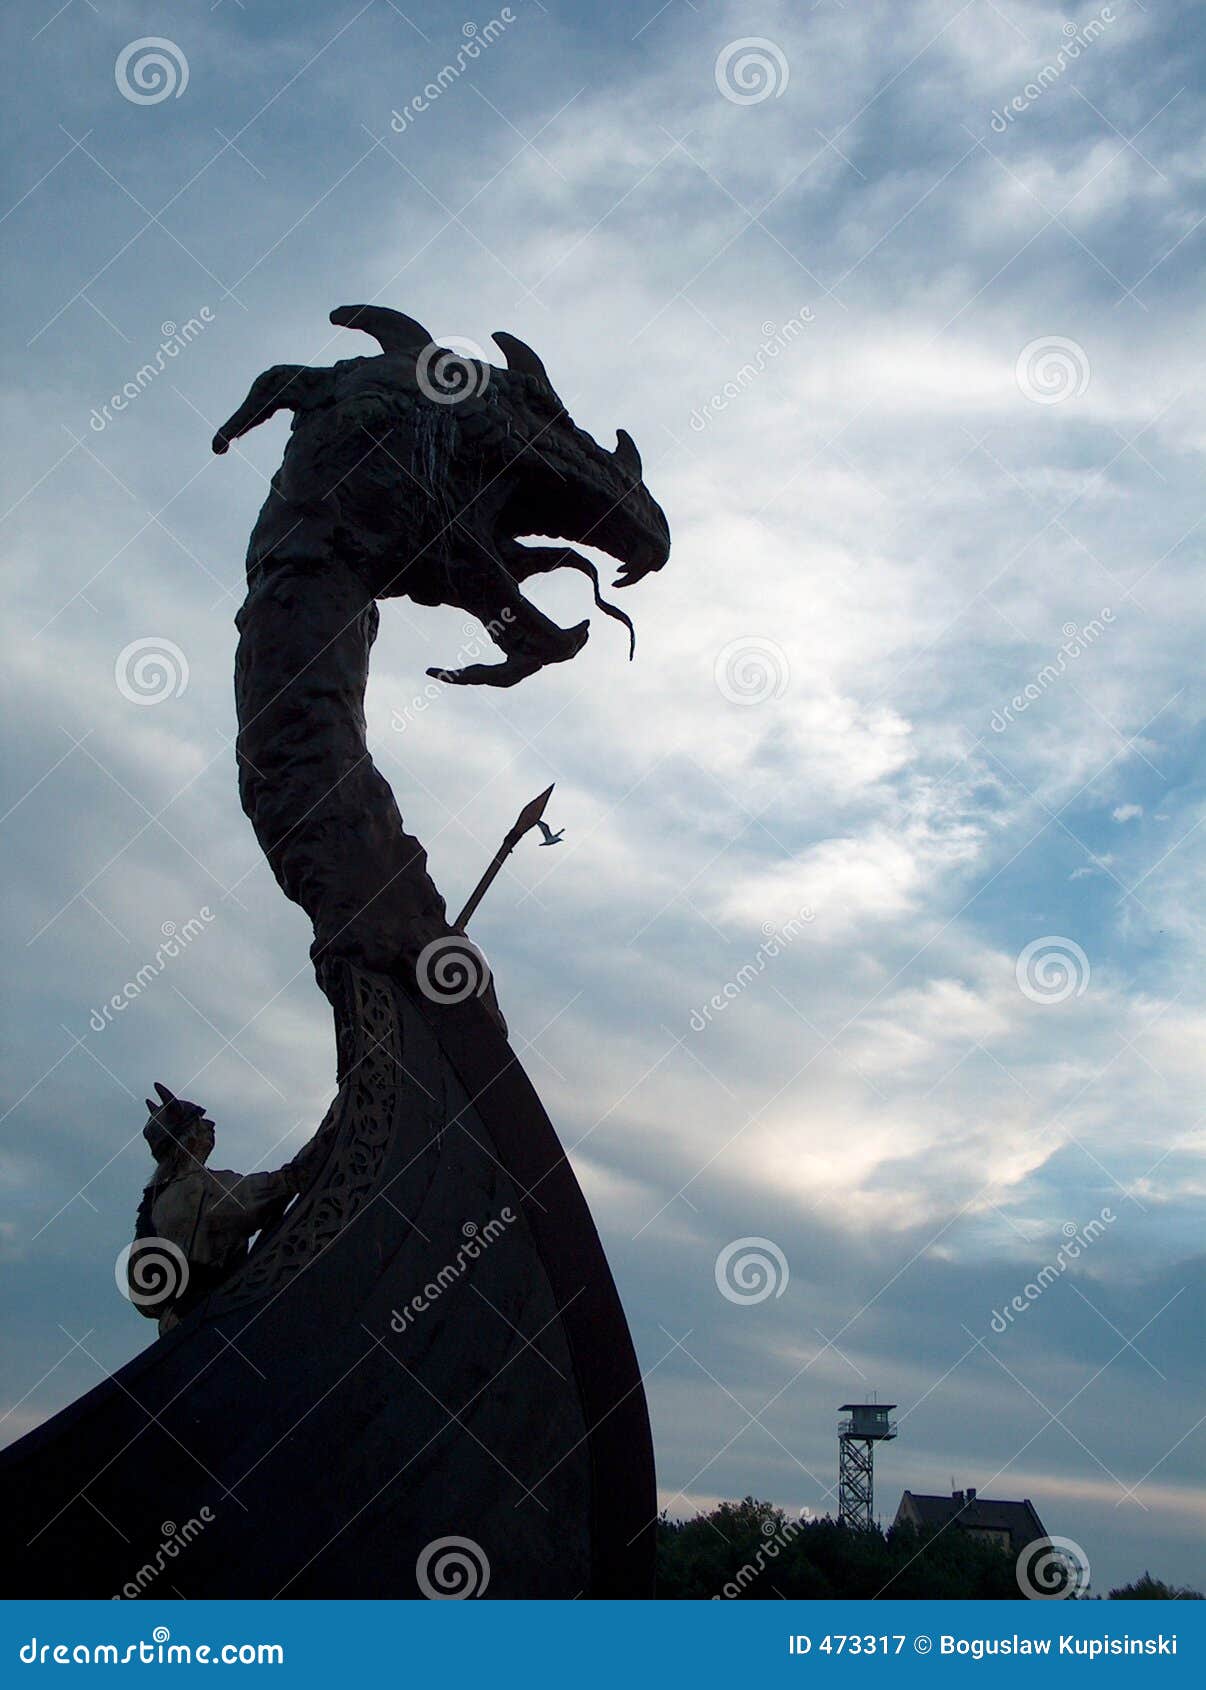 Viking S Dragon On The Boat Stock Image - Image of history ...